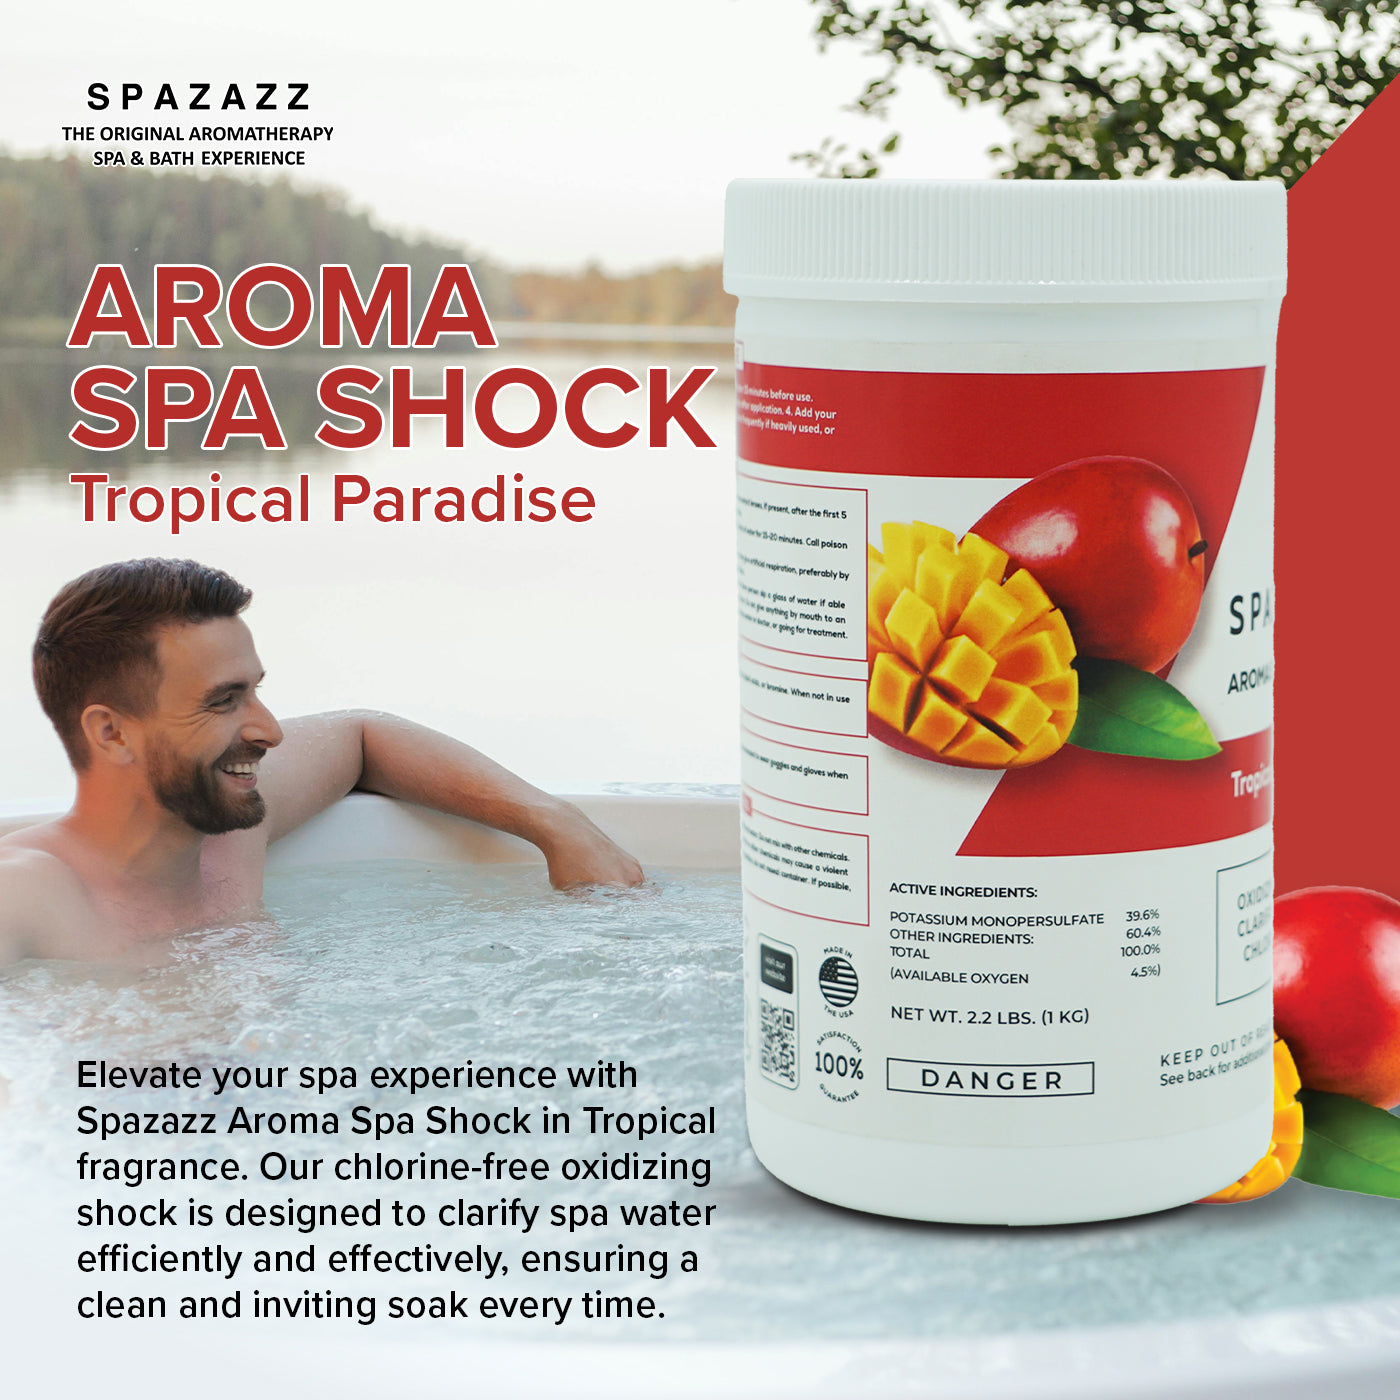 Aroma Spa Shock Tropical Paradise - Chlorine-Free Oxidizing Shock for Spa Water Clarification with Scoop - Professional Grade Formula